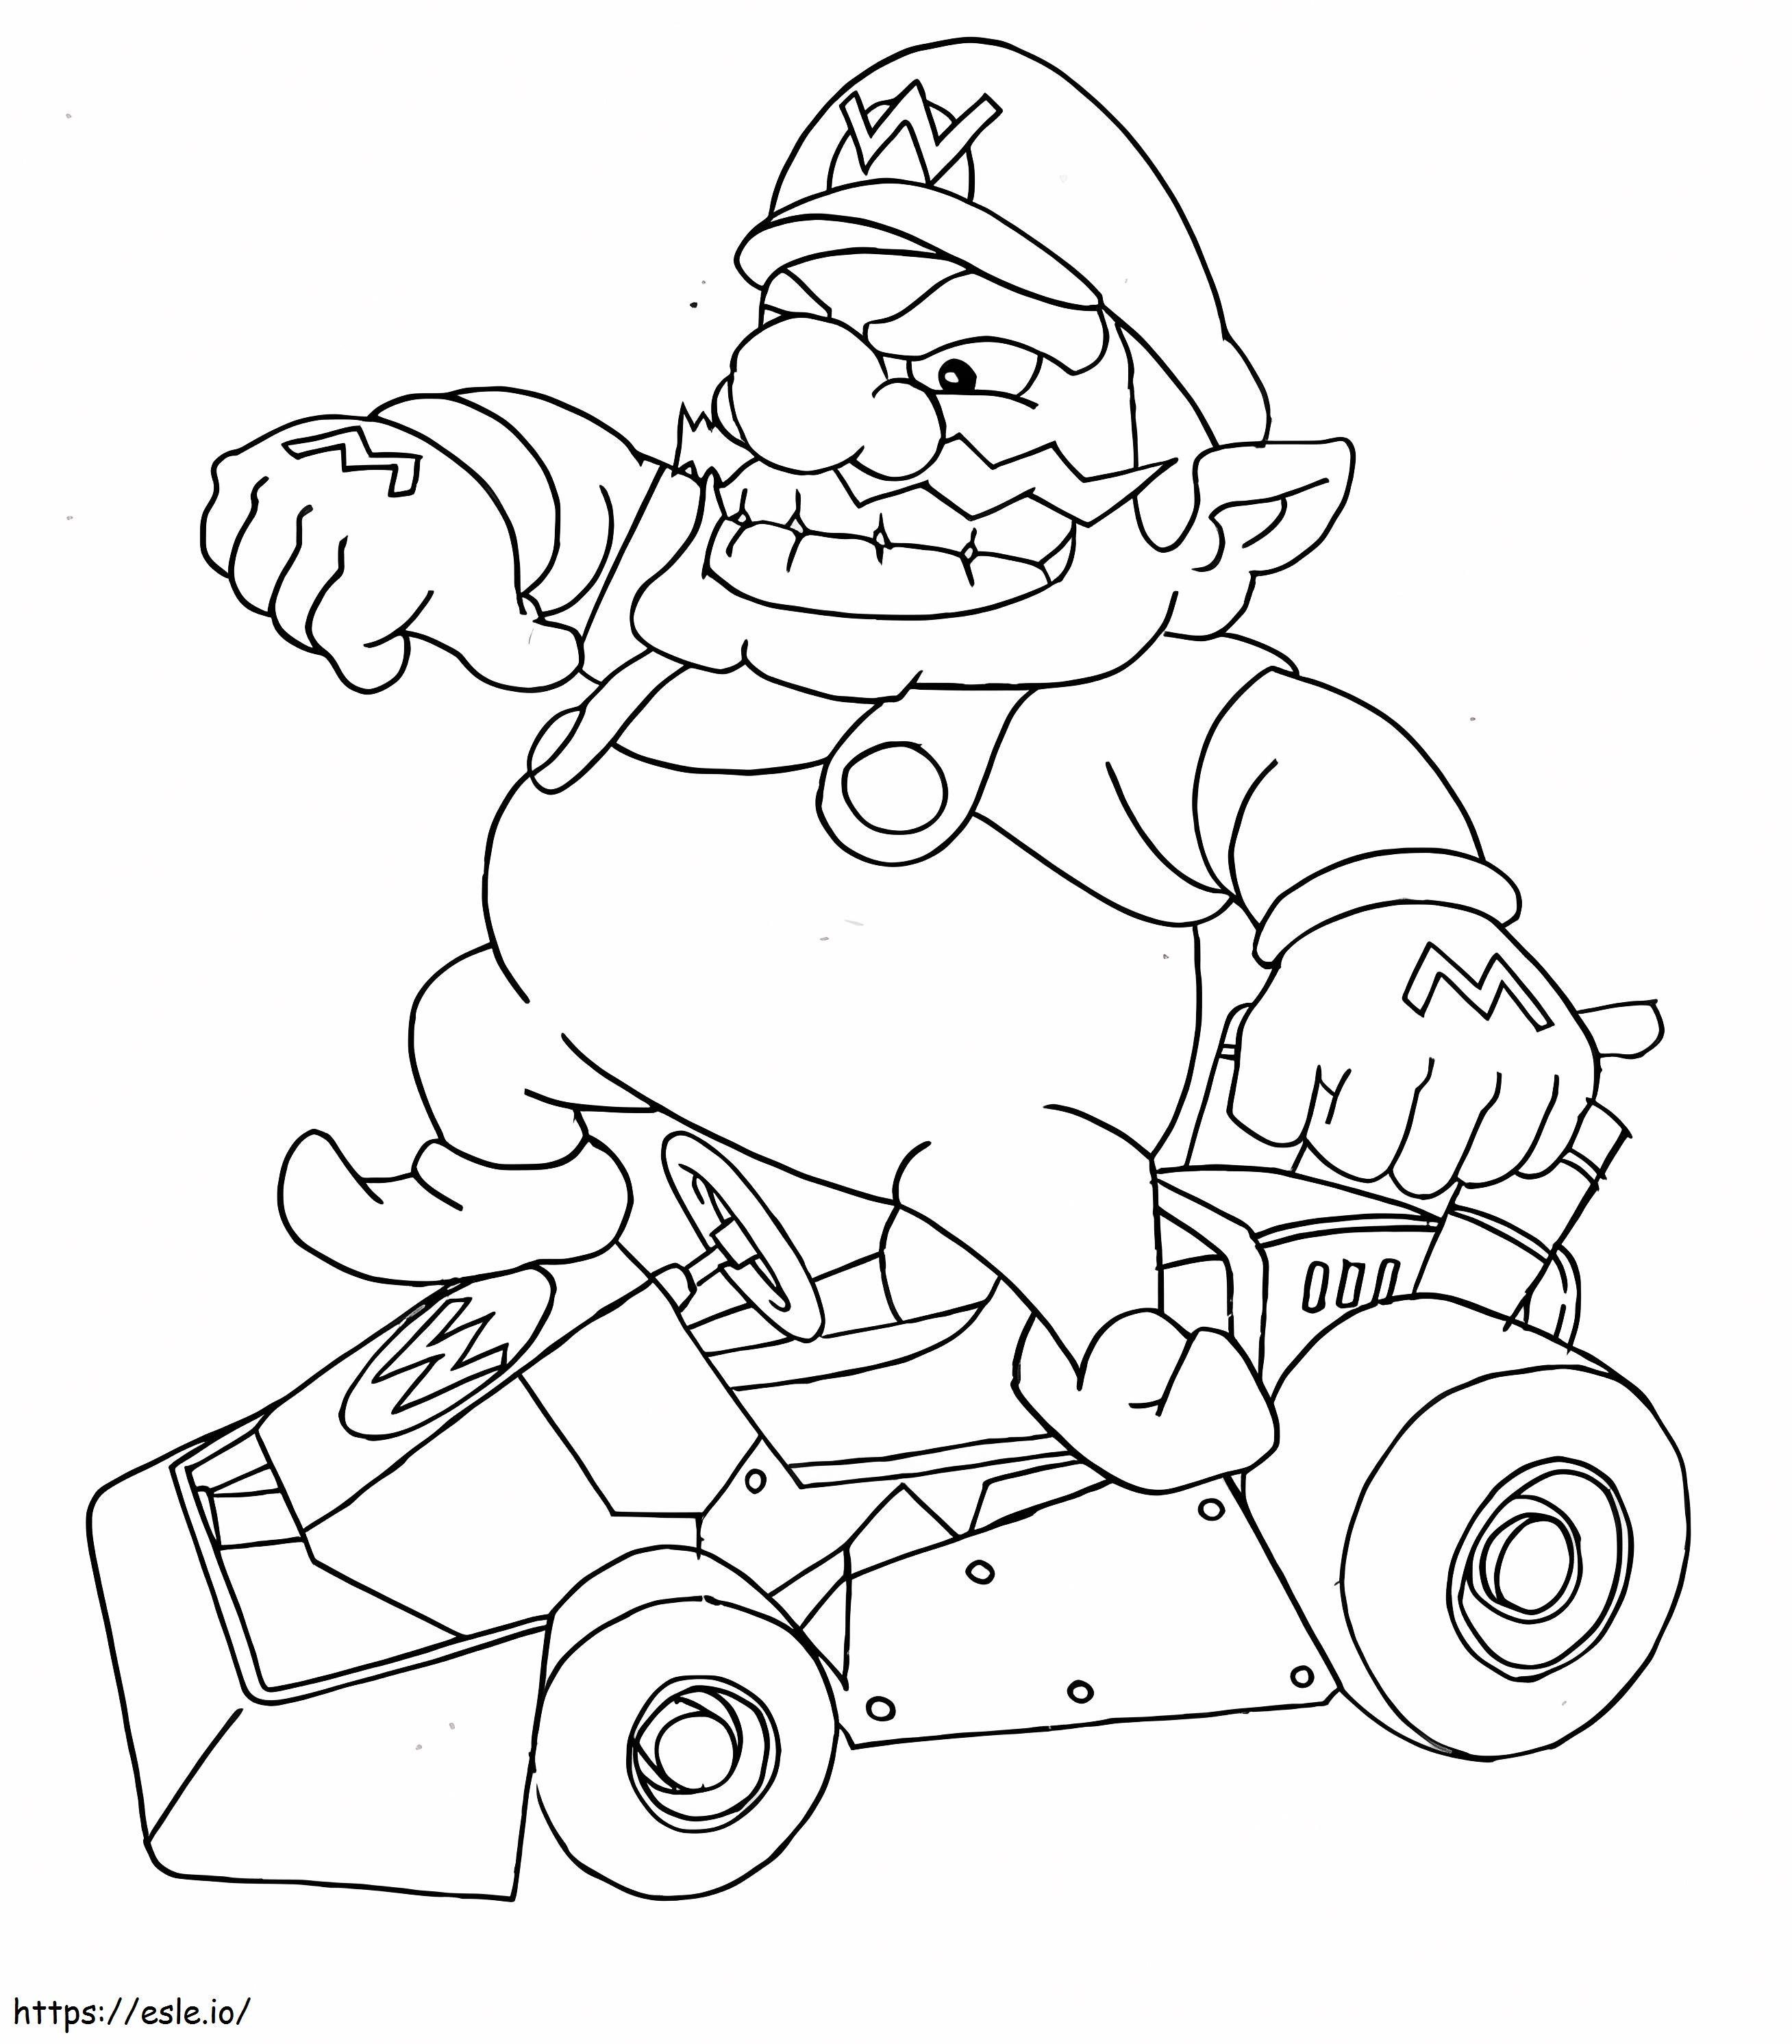 Wario In The Car coloring page